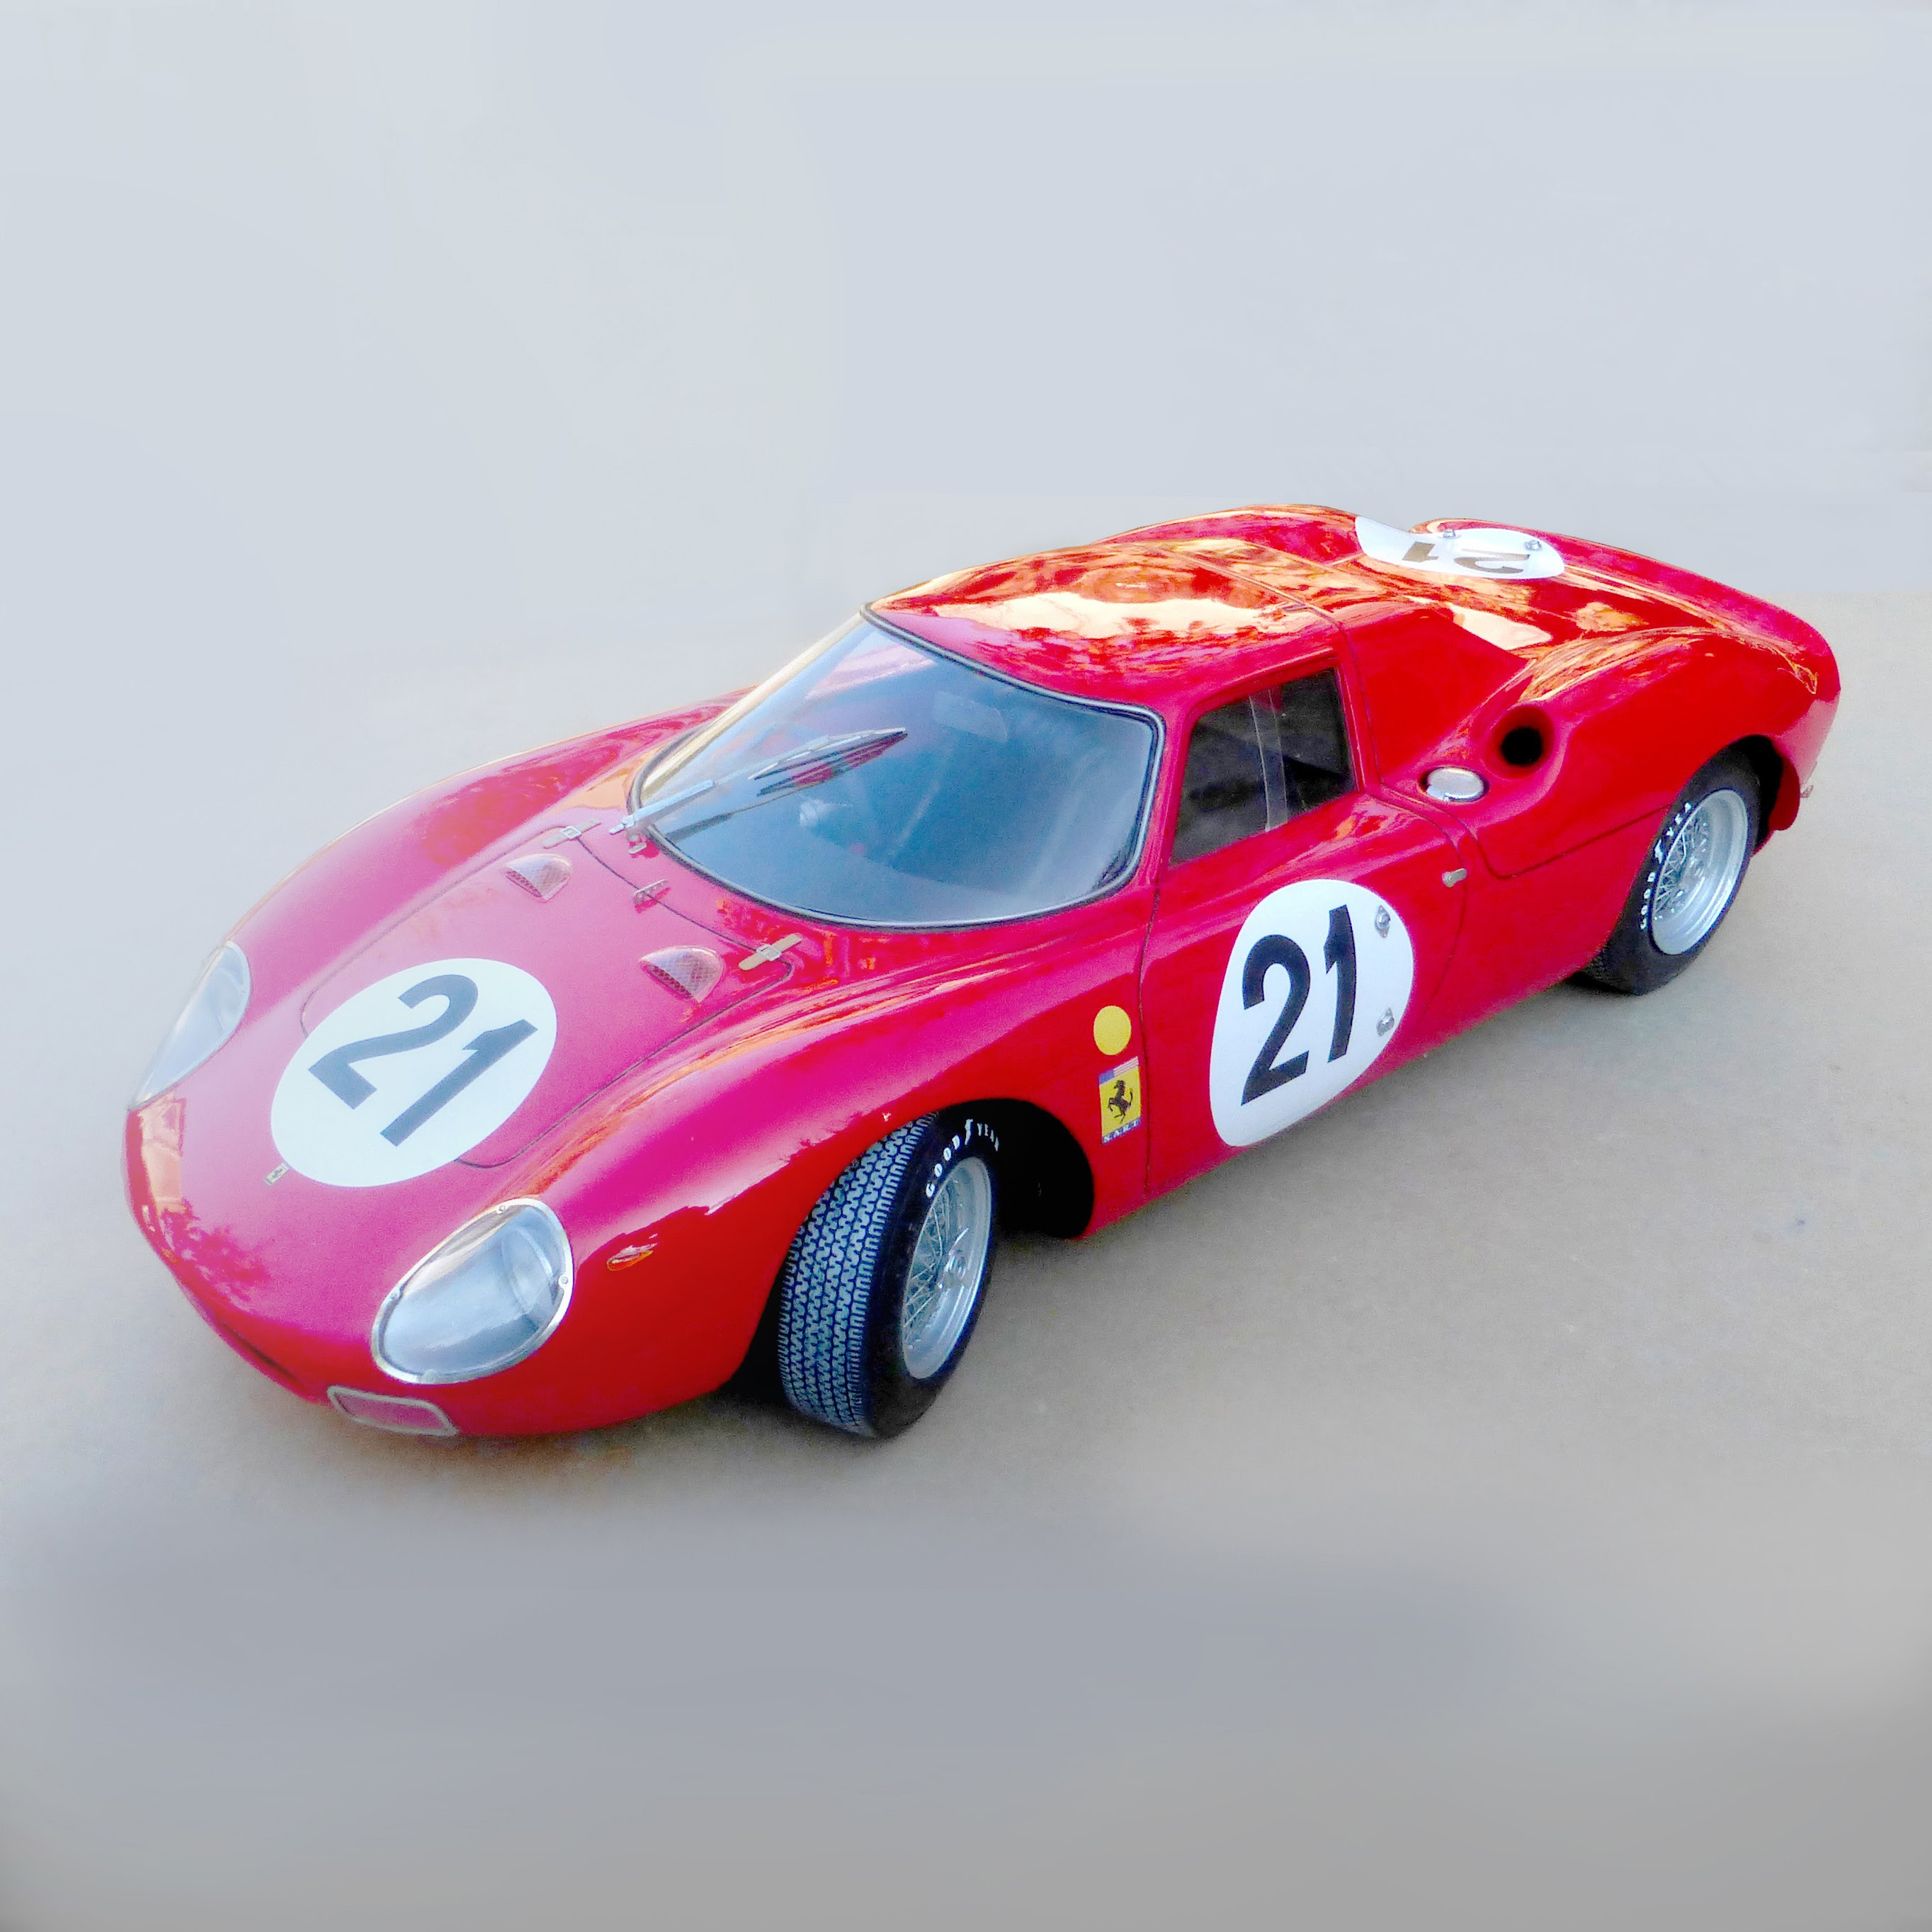 Ferrari collected nine victories at 24 hours of le mans from 1949 to 1965 and the 250 lm was the last winning car. Ferrari 250 Lm Le Mans 1965 N 21 In 1 12 Scale In Kit Handbuilt